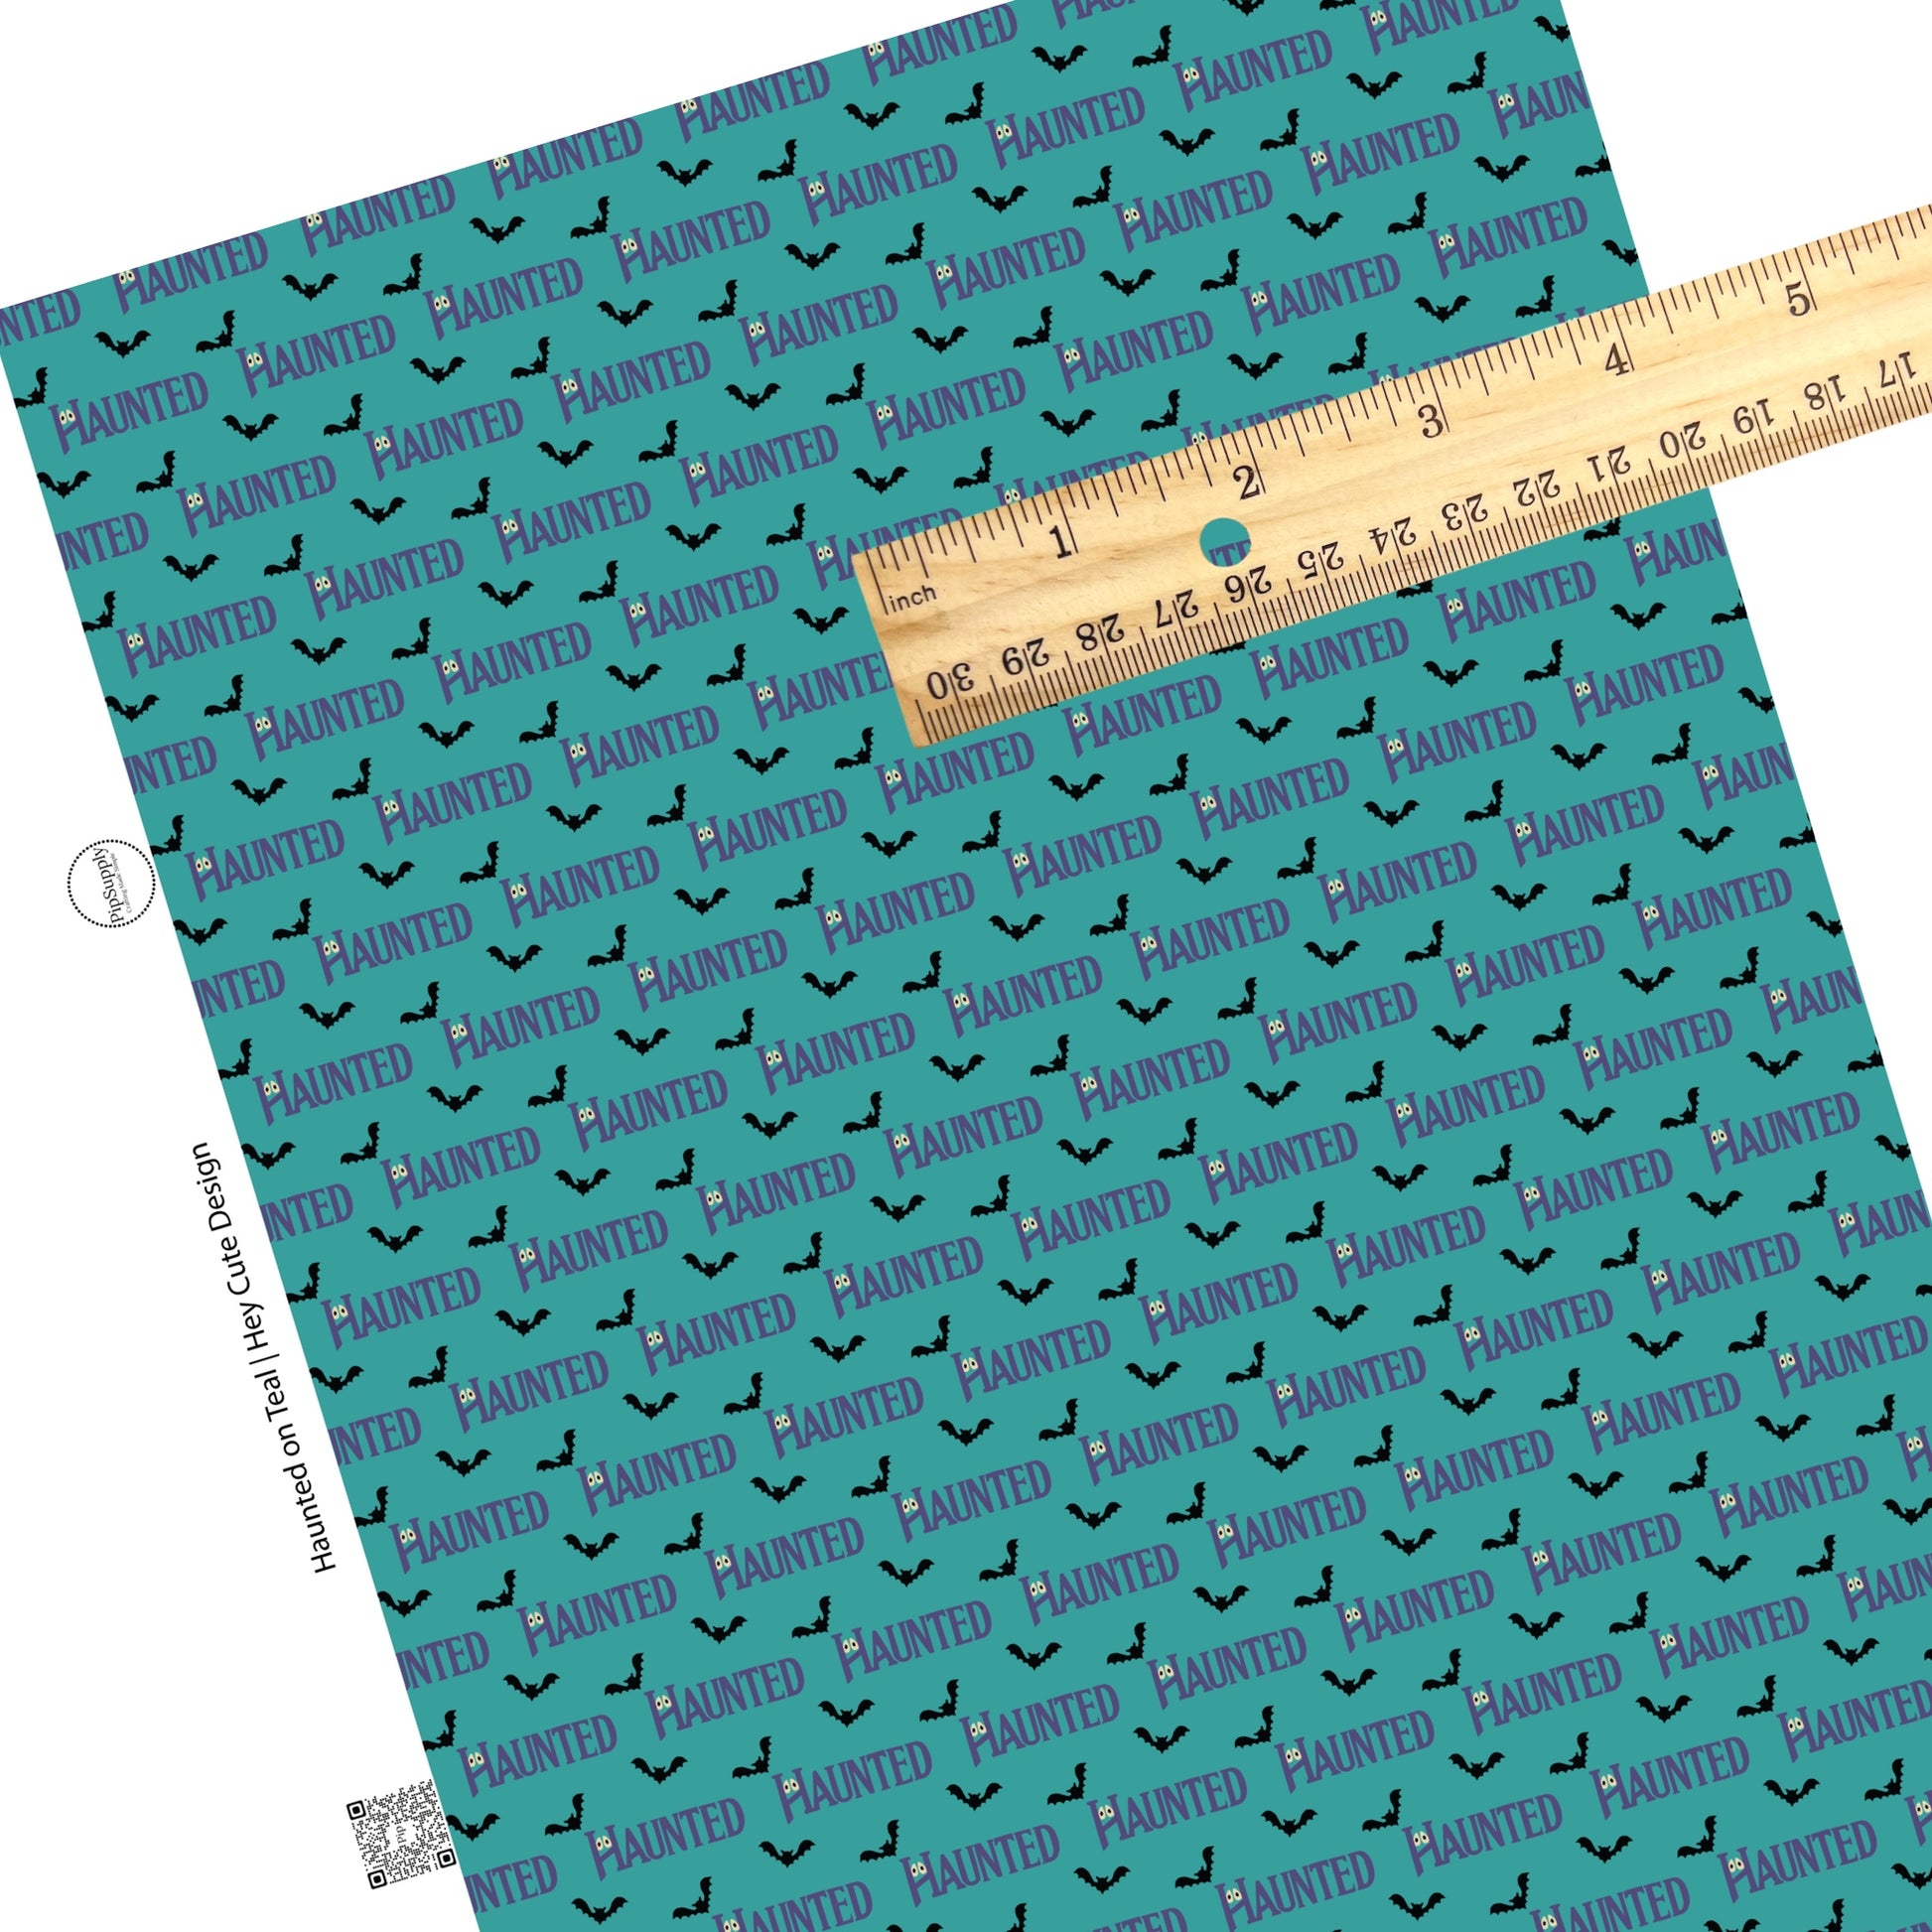 Flying bats with eyes on haunted sayings on teal faux leather sheet